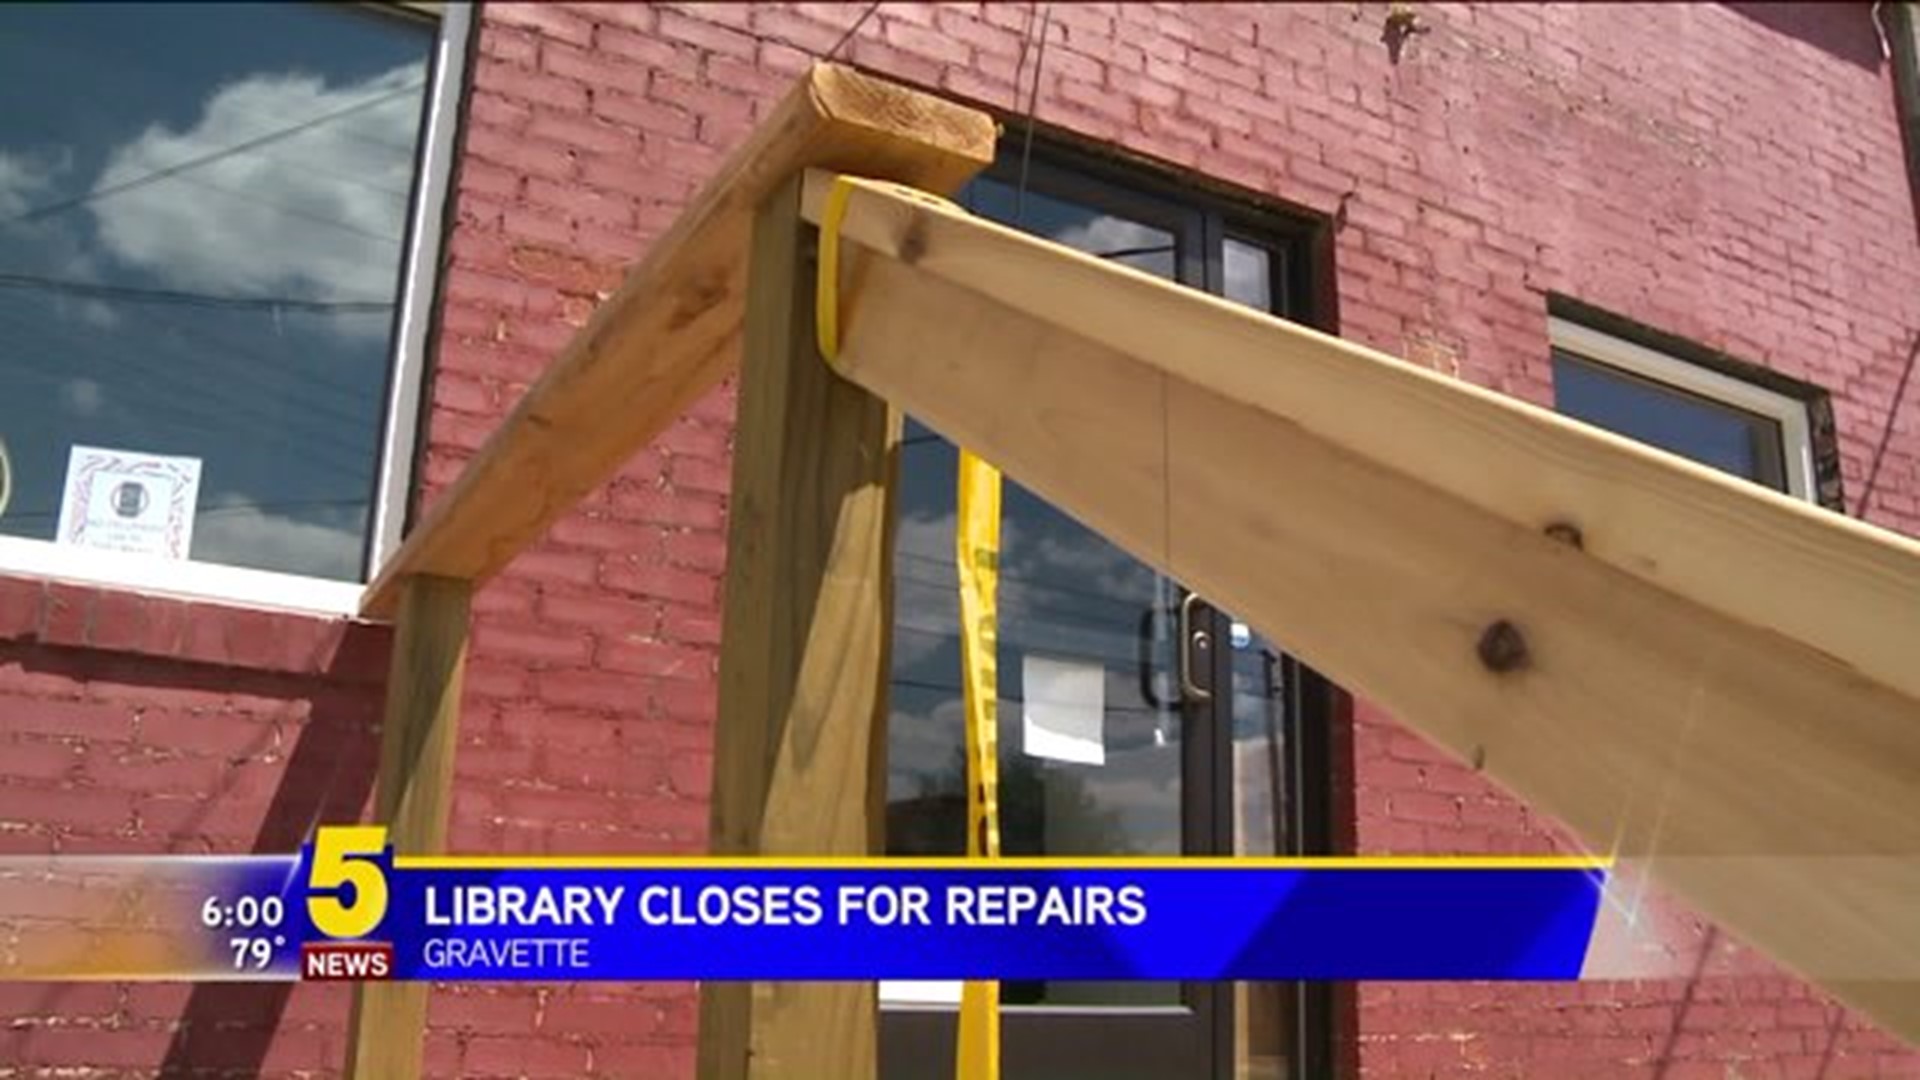 GRAVETTE LIBRARY CLOSES FOR REPAIRS